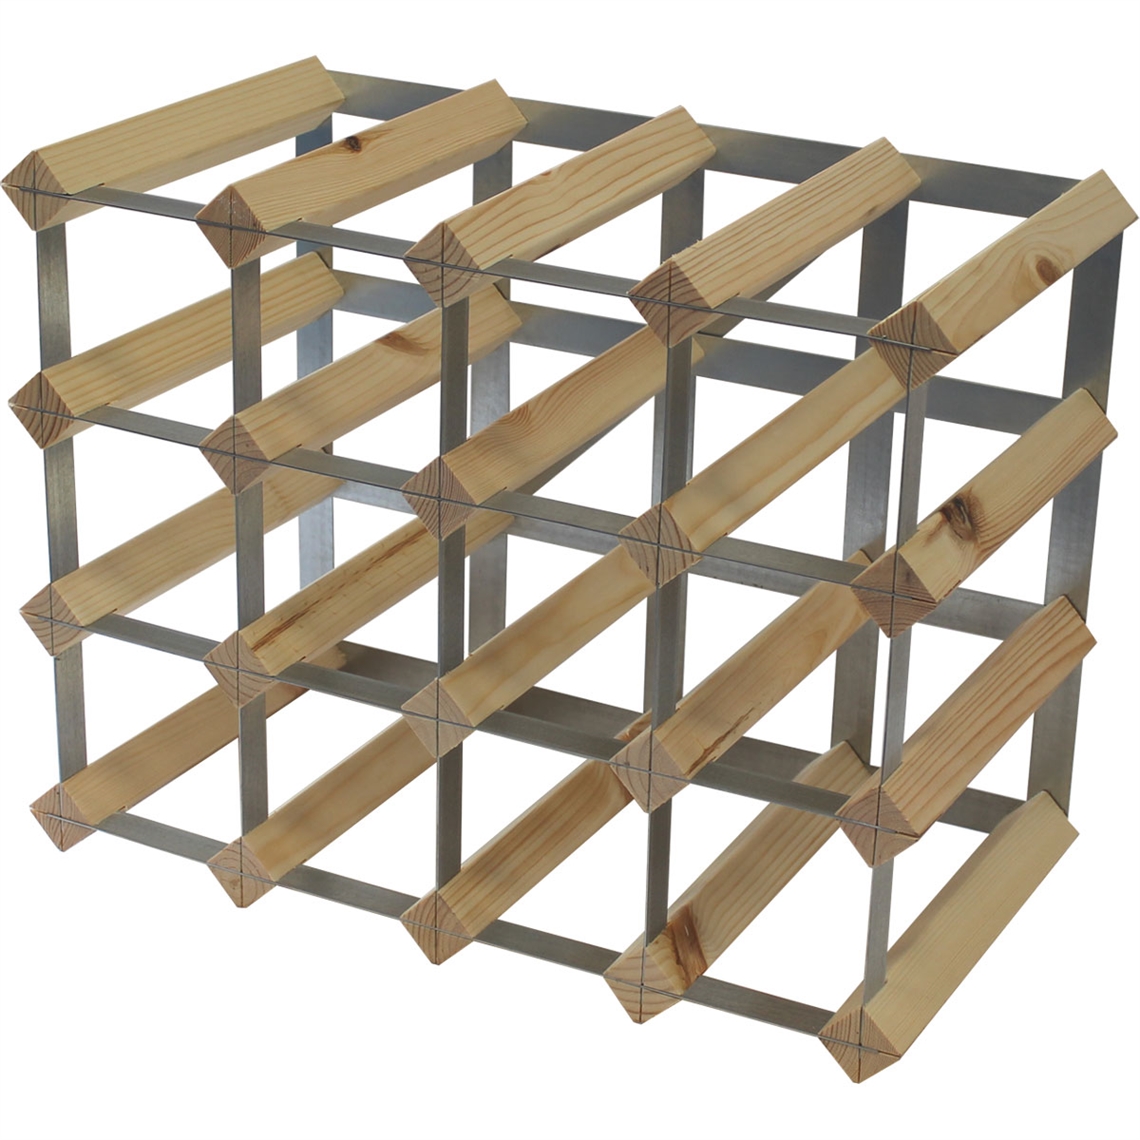 Made in The UK Wineware 16 Bottle Fully Assembled Wooden Wine Rack Natural Pine & Galvanised Steel 